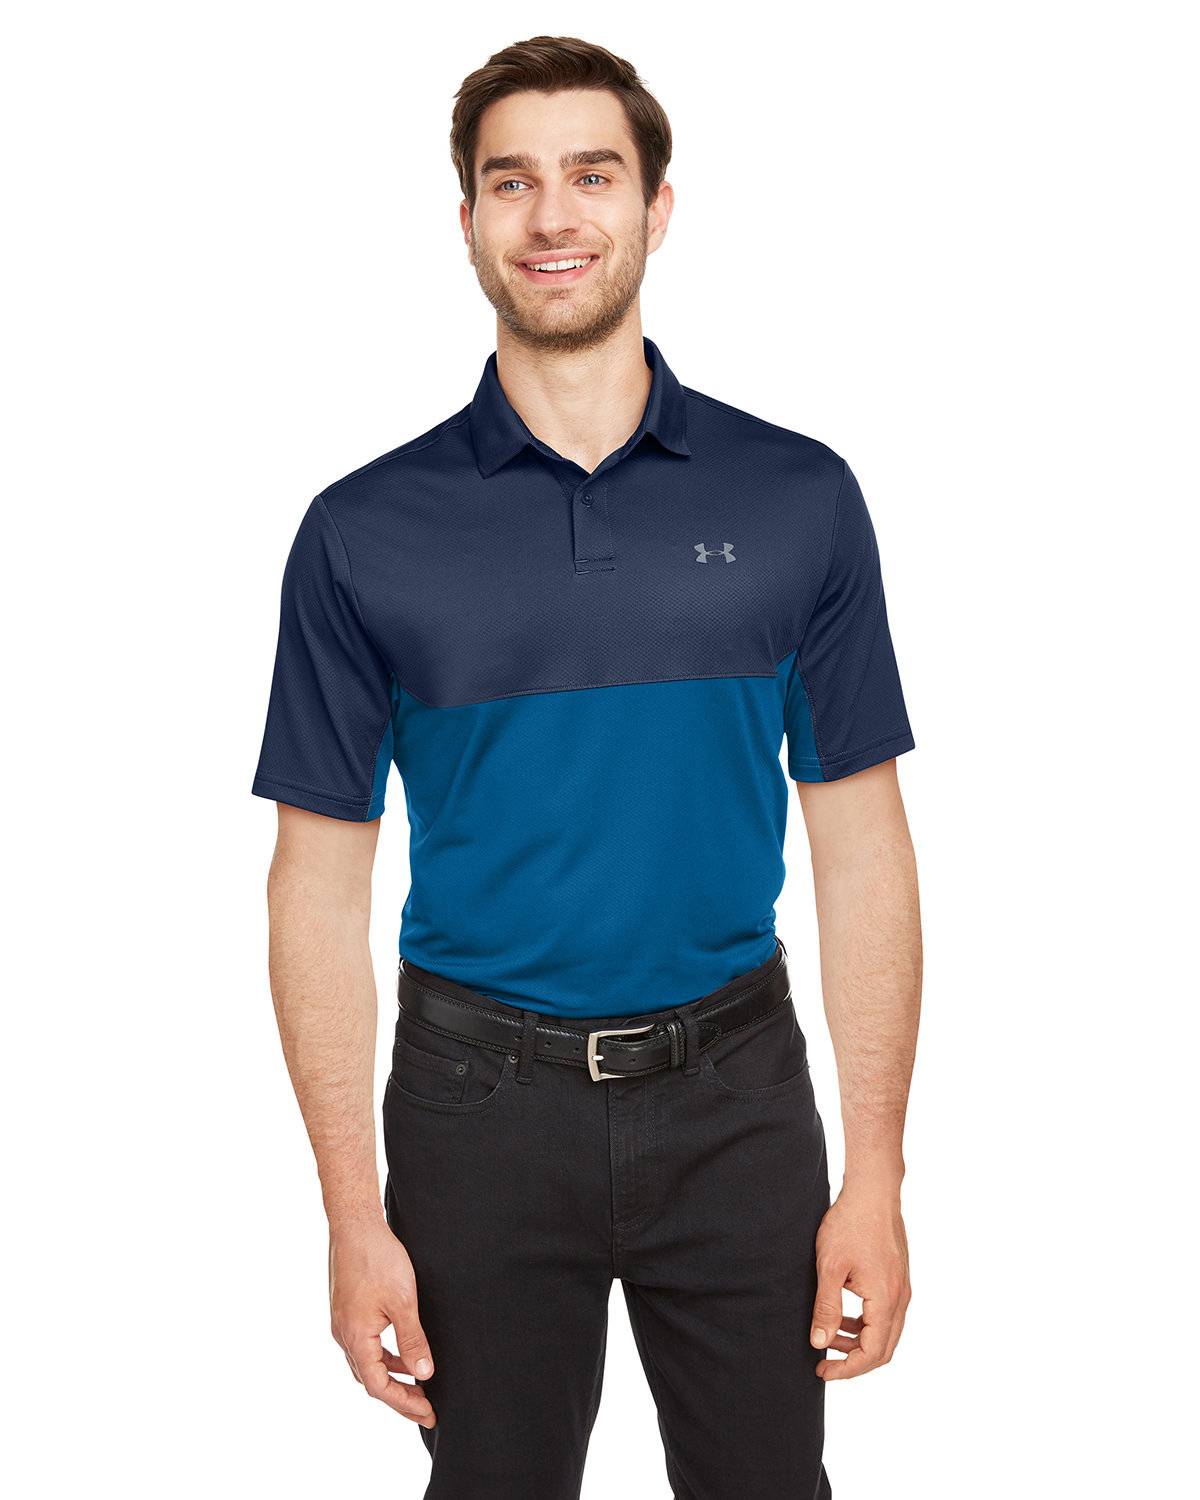 Under Armour 1355485 Mens Performance 2.0 Colorblock Polo - Free ...